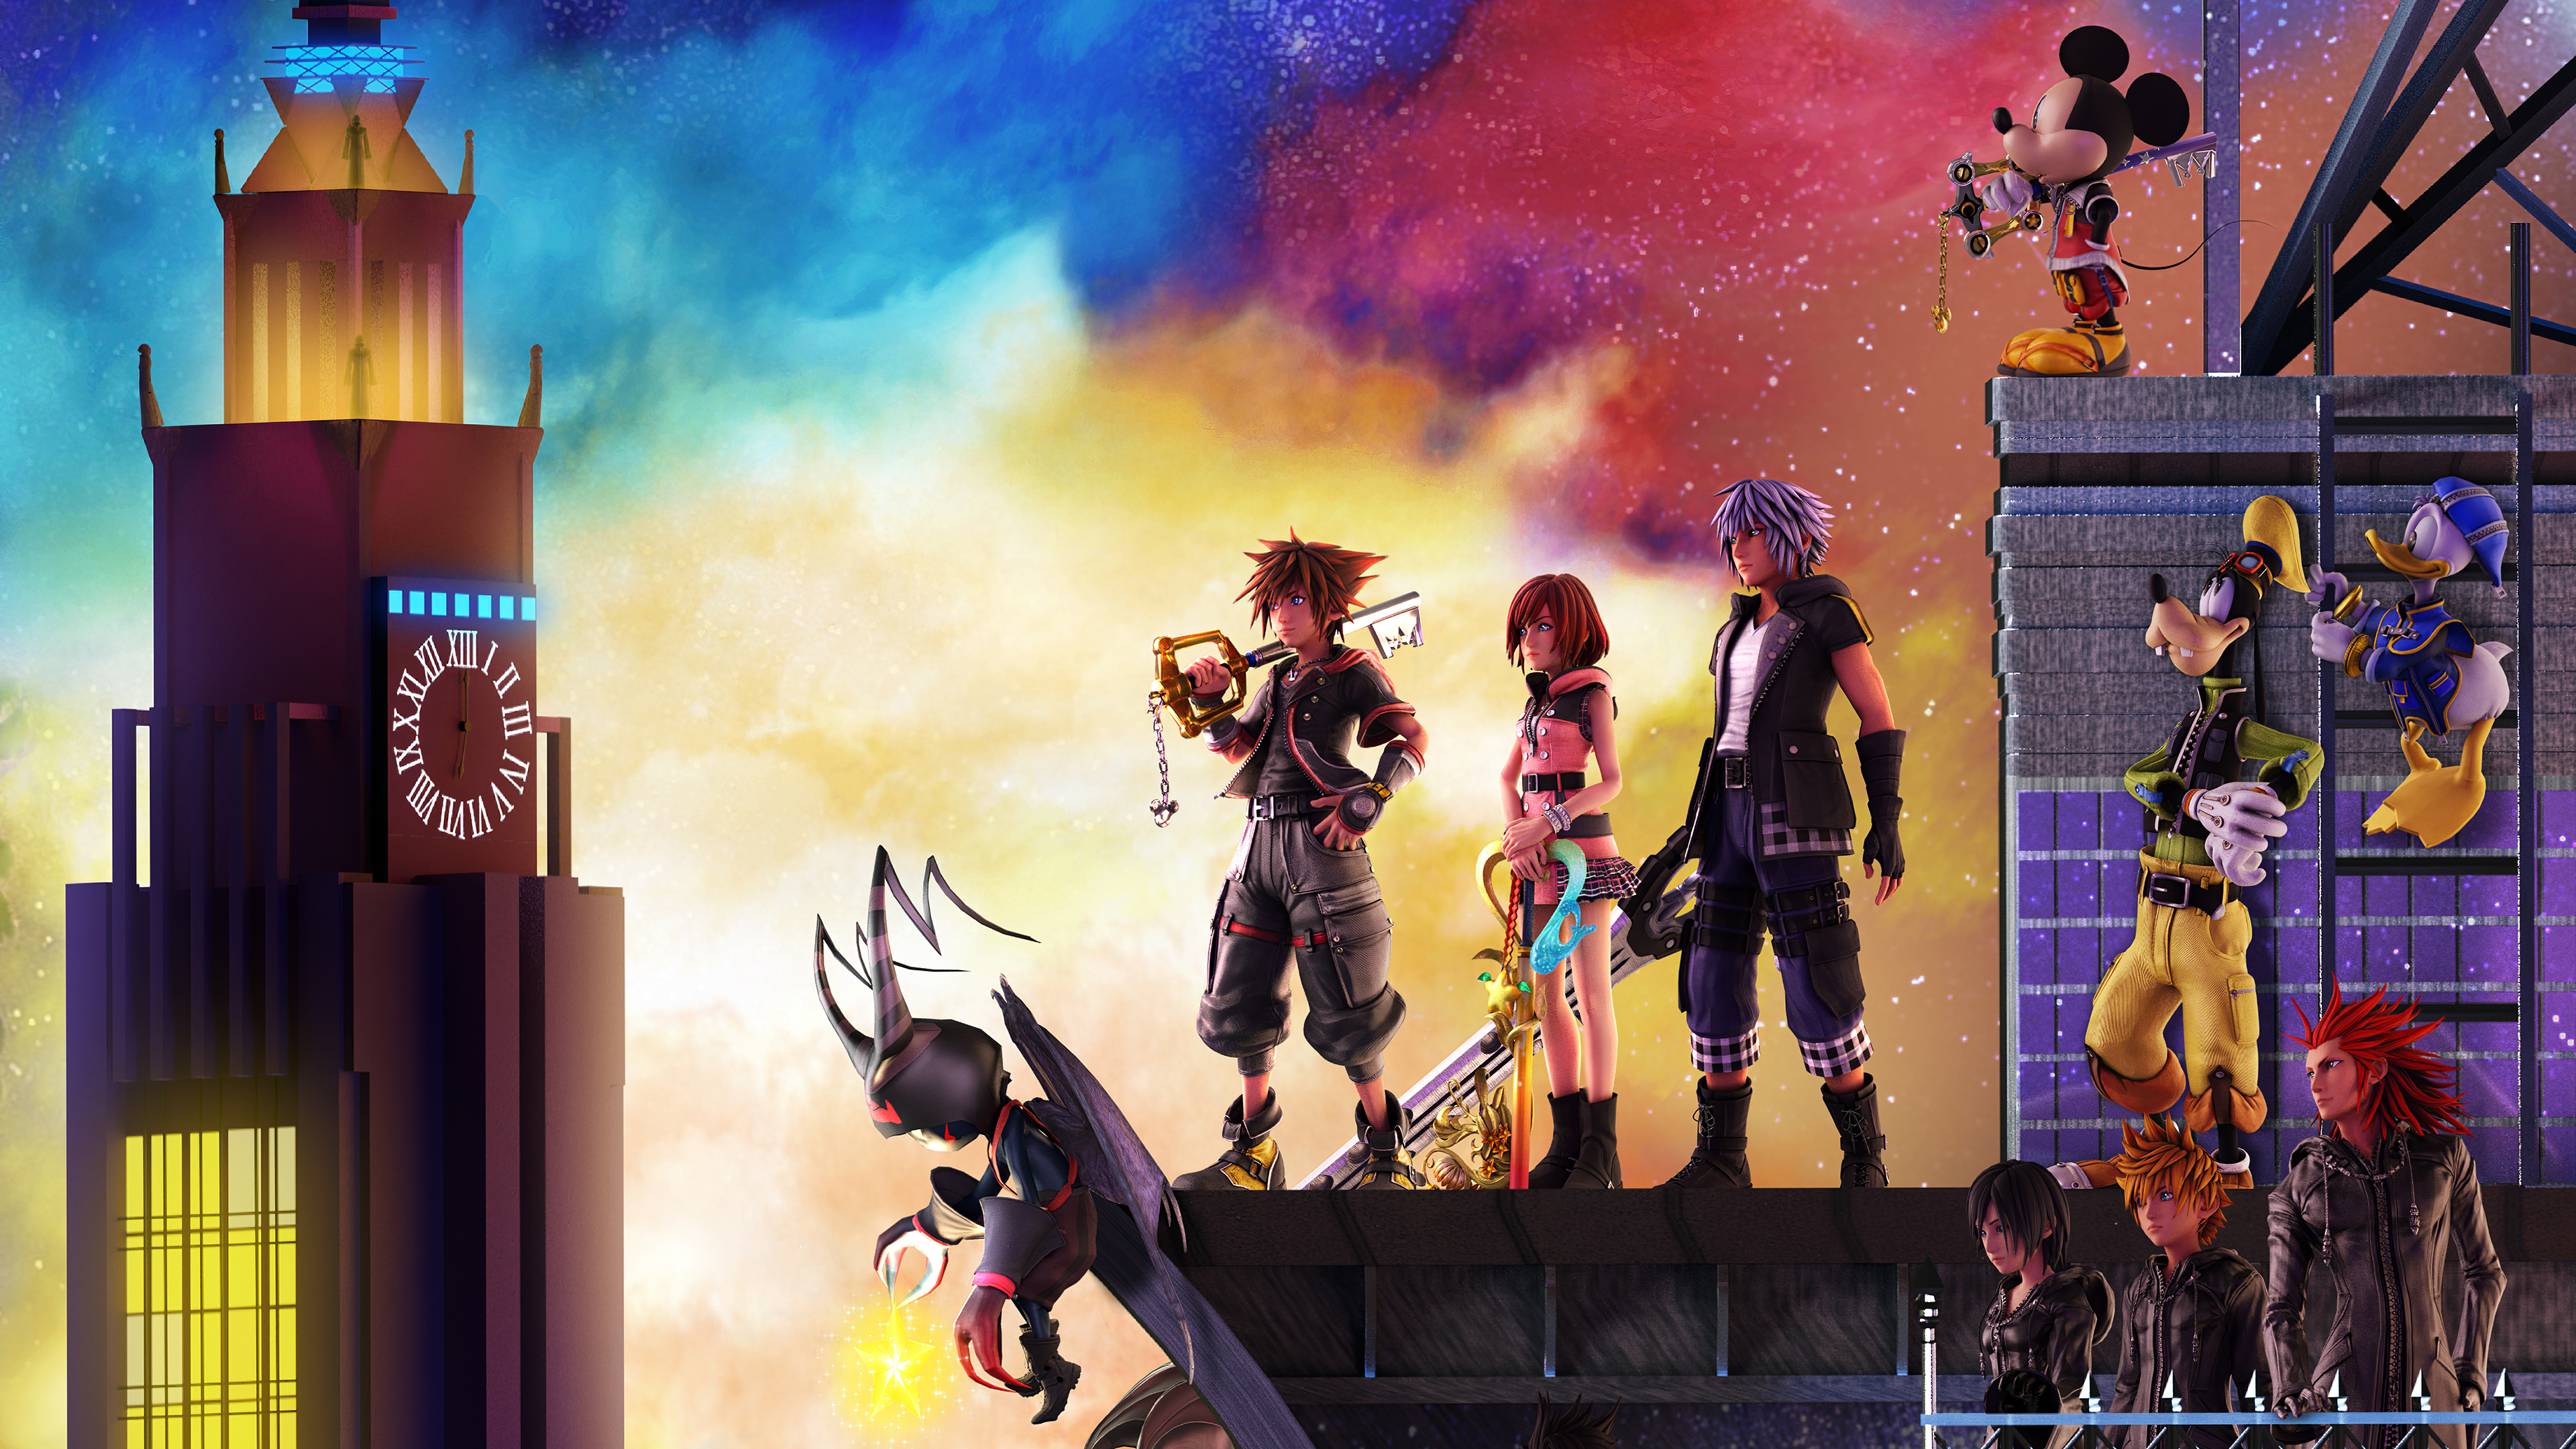 2932x Kingdom Hearts 3 2932x Resolution Wallpaper Hd Games 4k Wallpapers Images Photos And Background Wallpapers Den